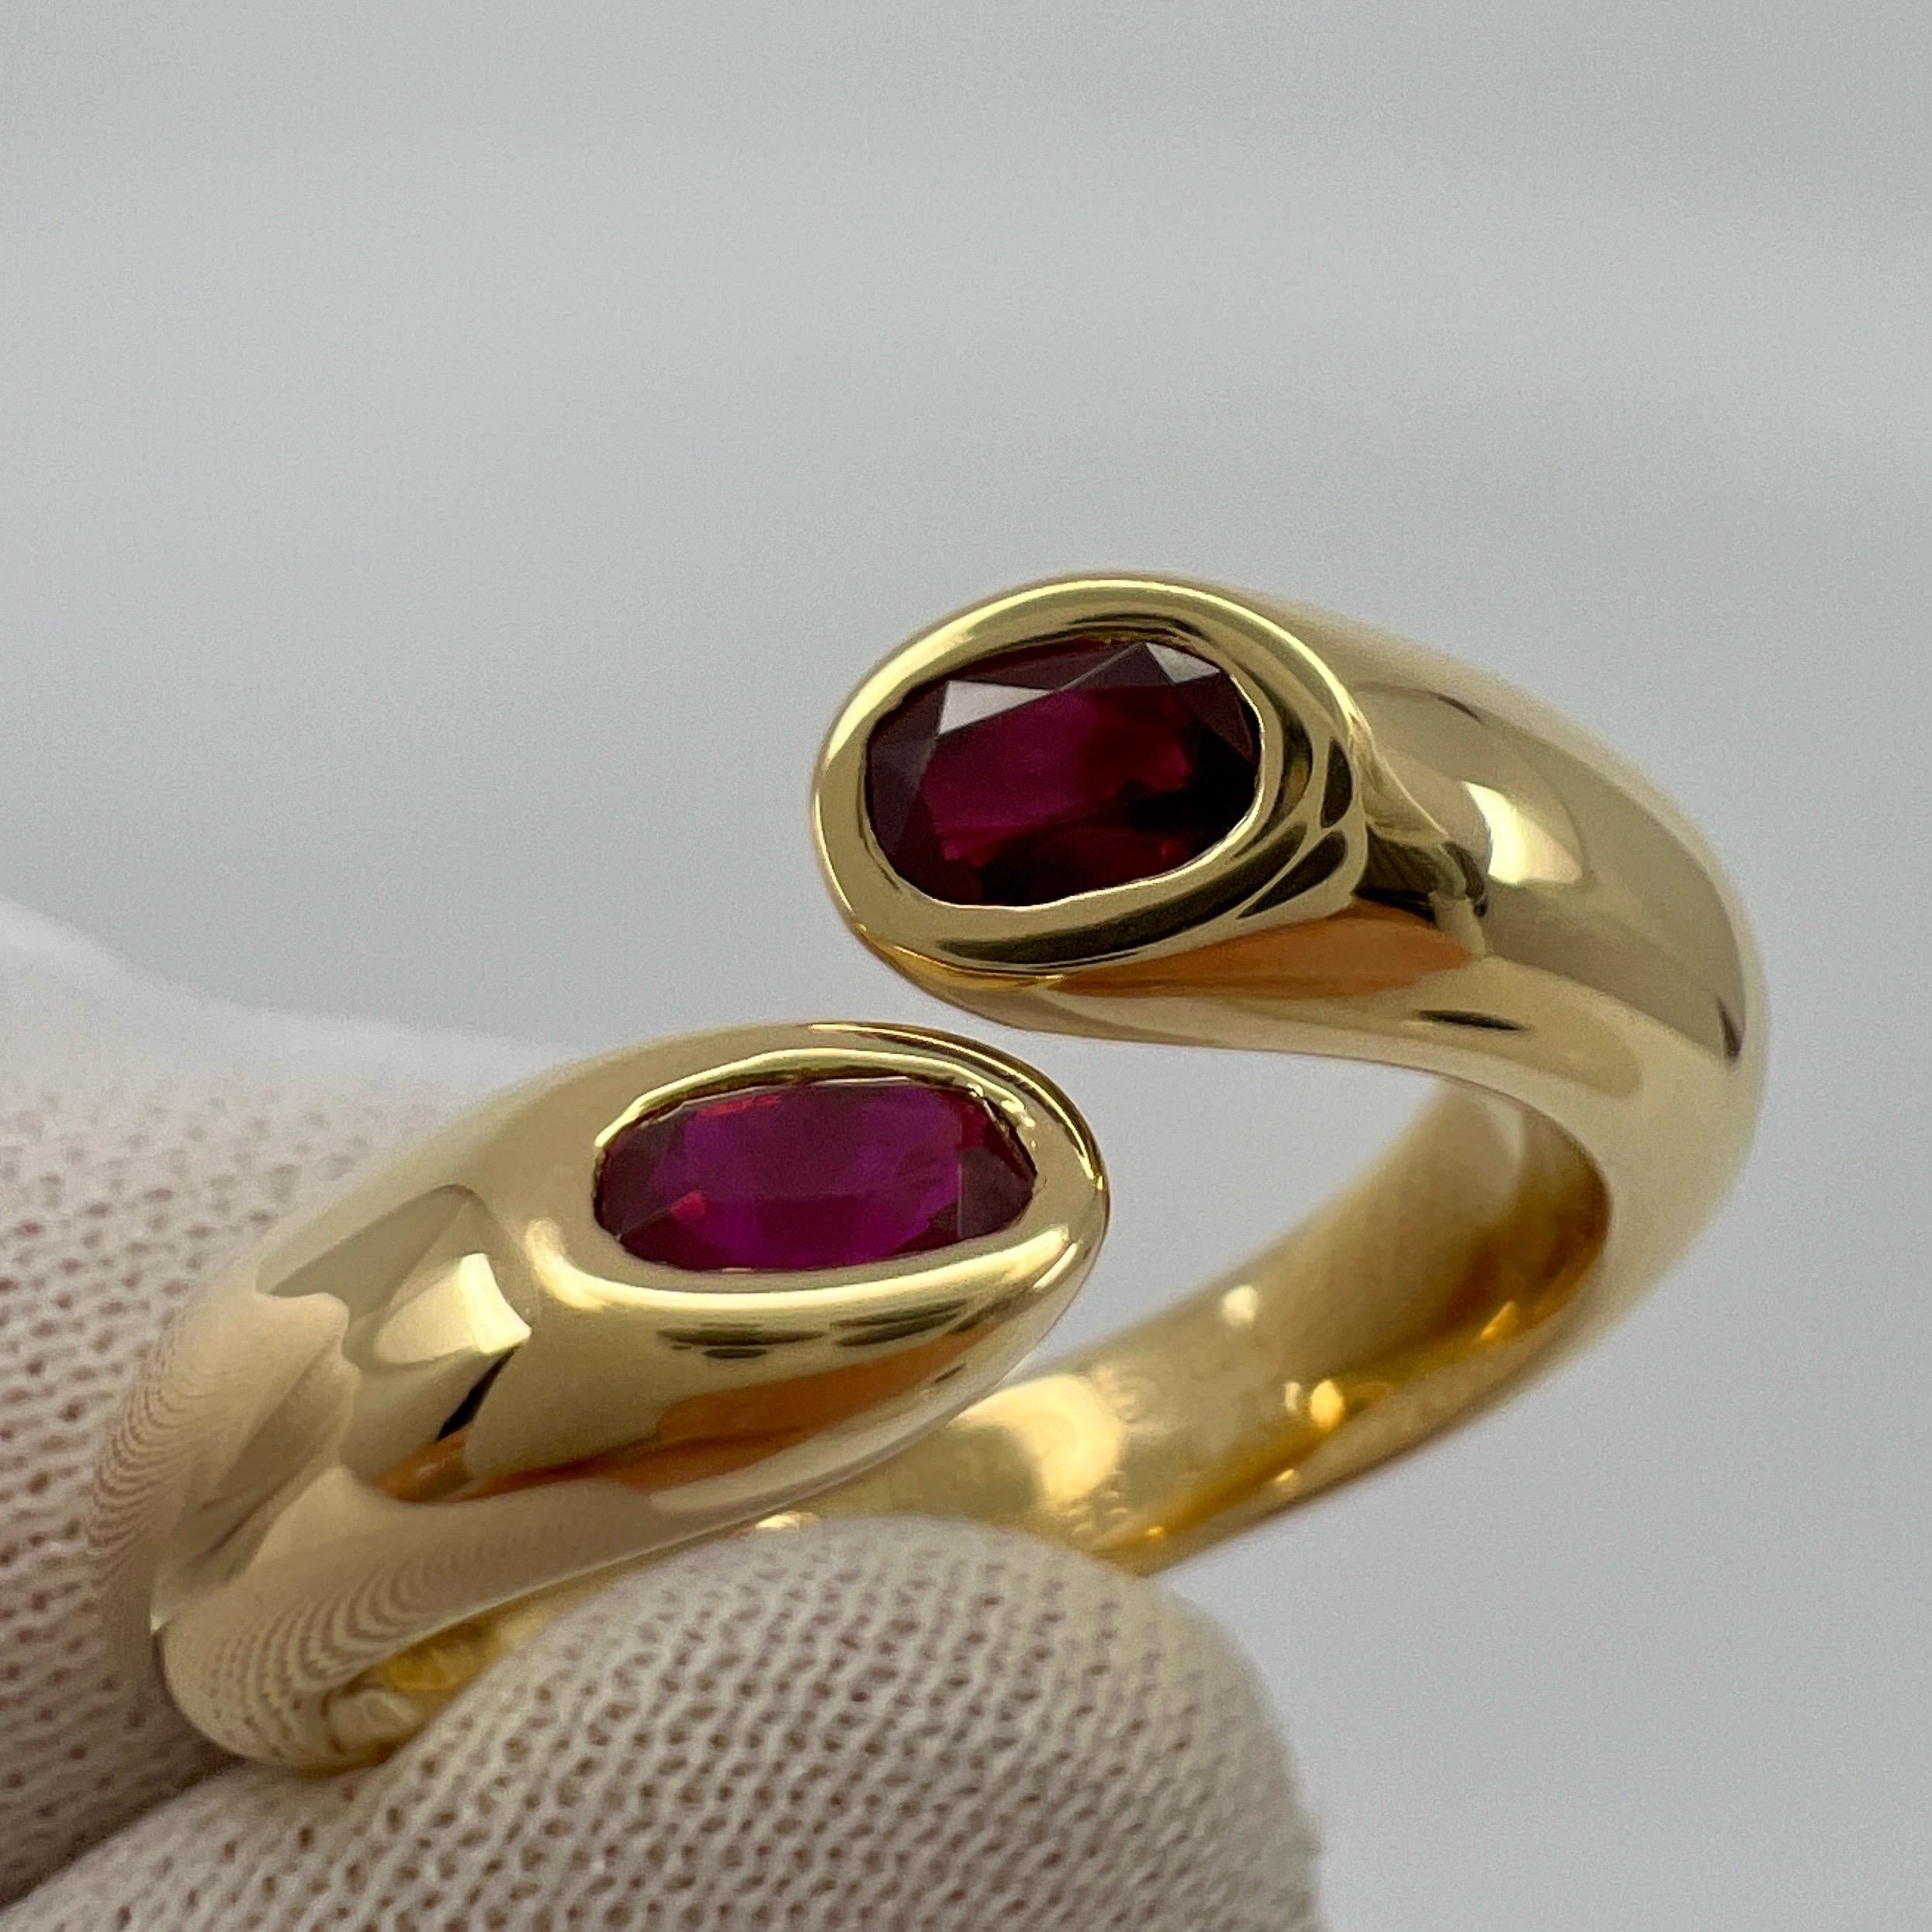 Rare Vintage Cartier Red Ruby Ellipse Oval Cut 18k Gold Bypass Split Ring 6 52 3